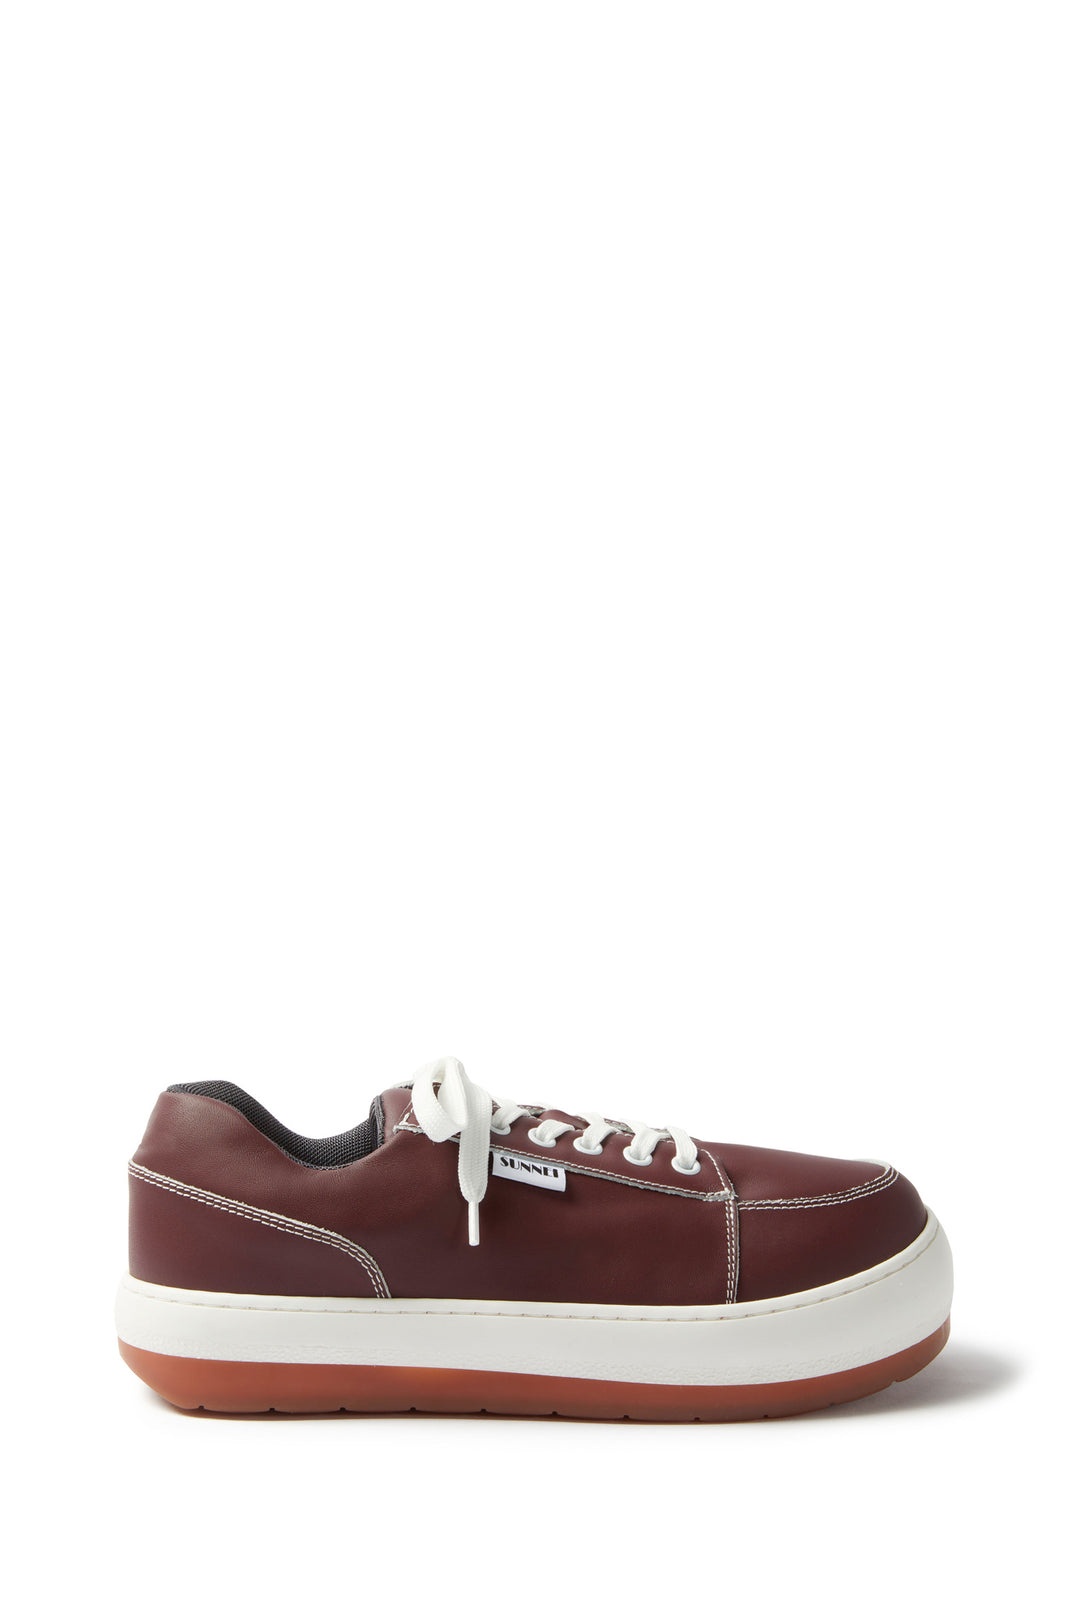 DREAMY SHOES / leather / maroon - 1